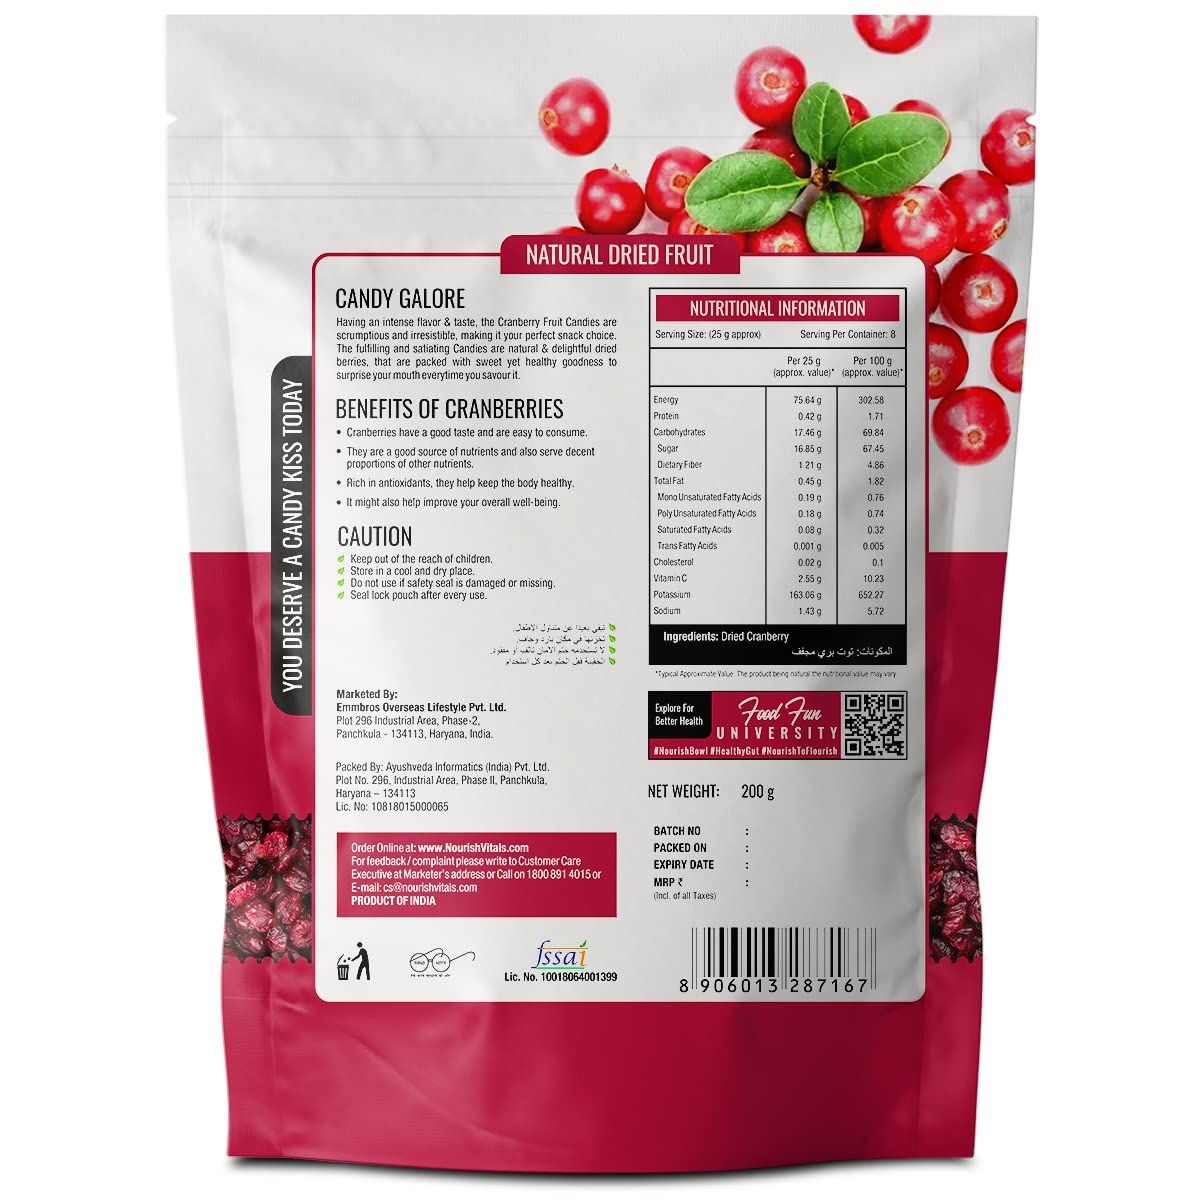 NourishVitals Cranberry Dehydrated Dried Fruit Image